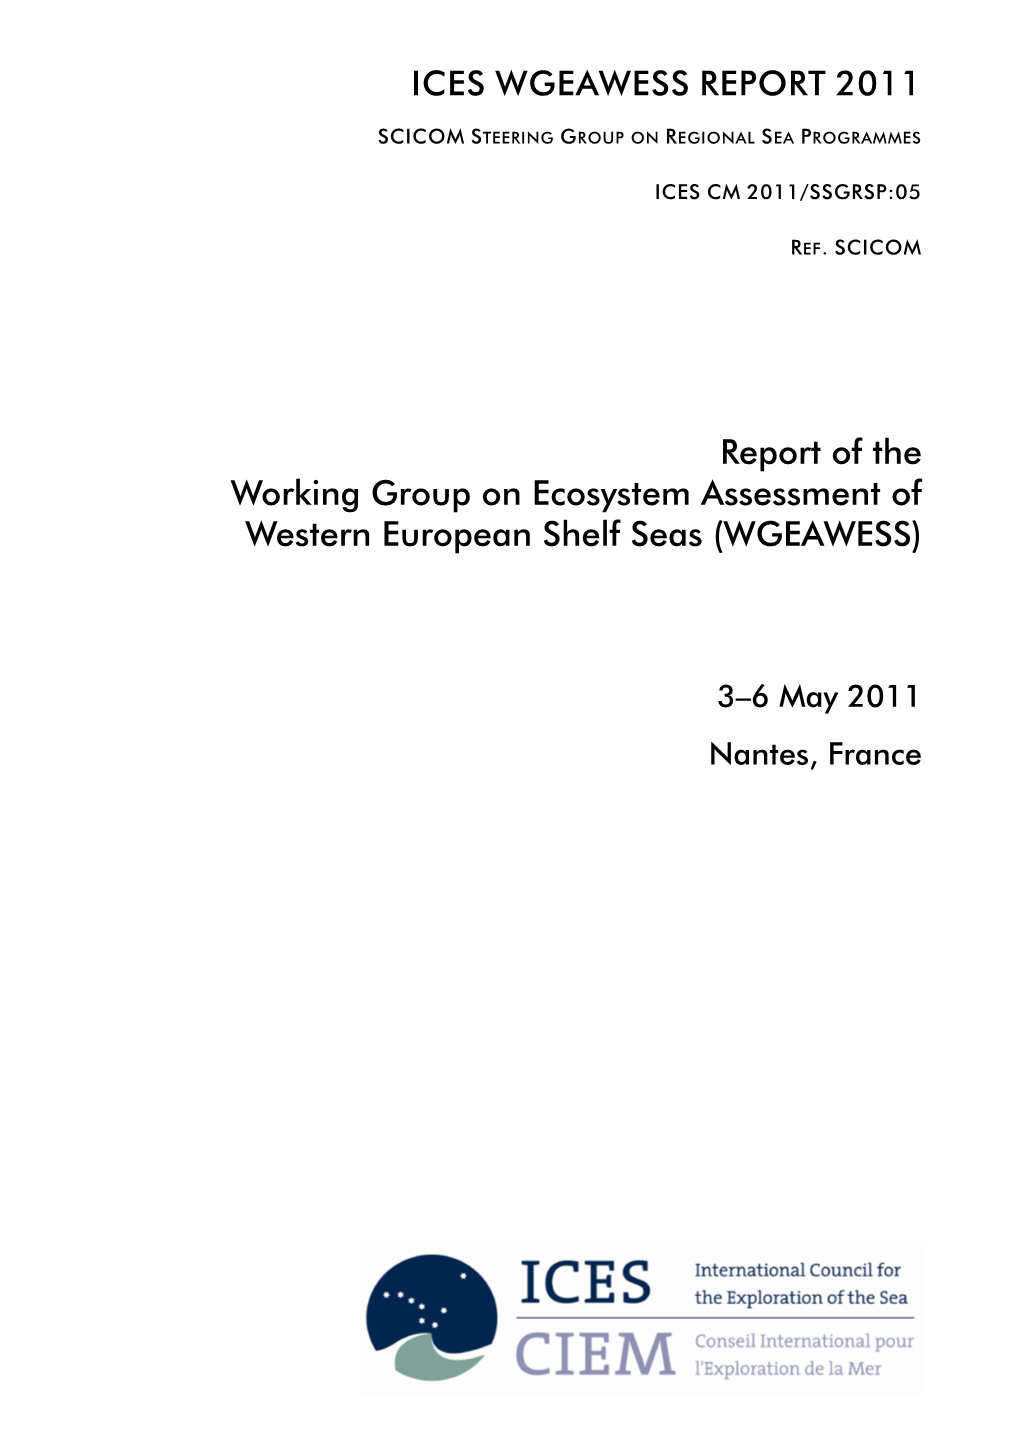 Report of the Working Group on Ecosystem Assessment of Western European Shelf Seas (WGEAWESS)